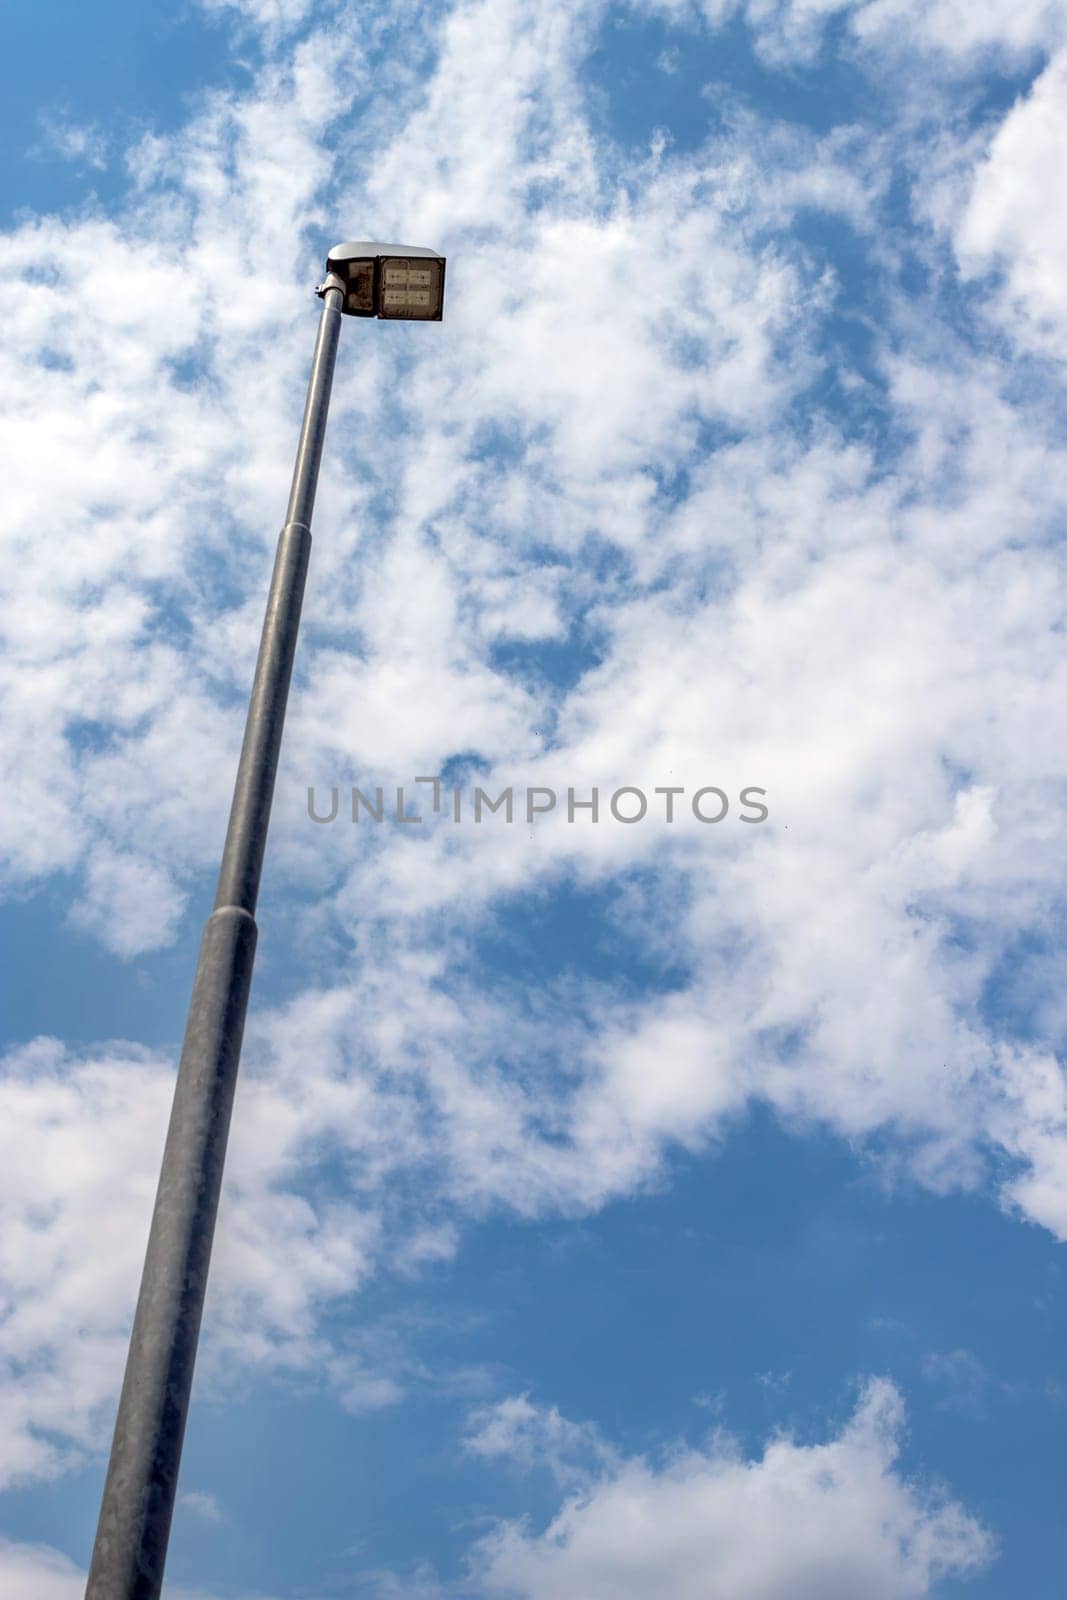 LED street lamp post on blue sky background with white clouds